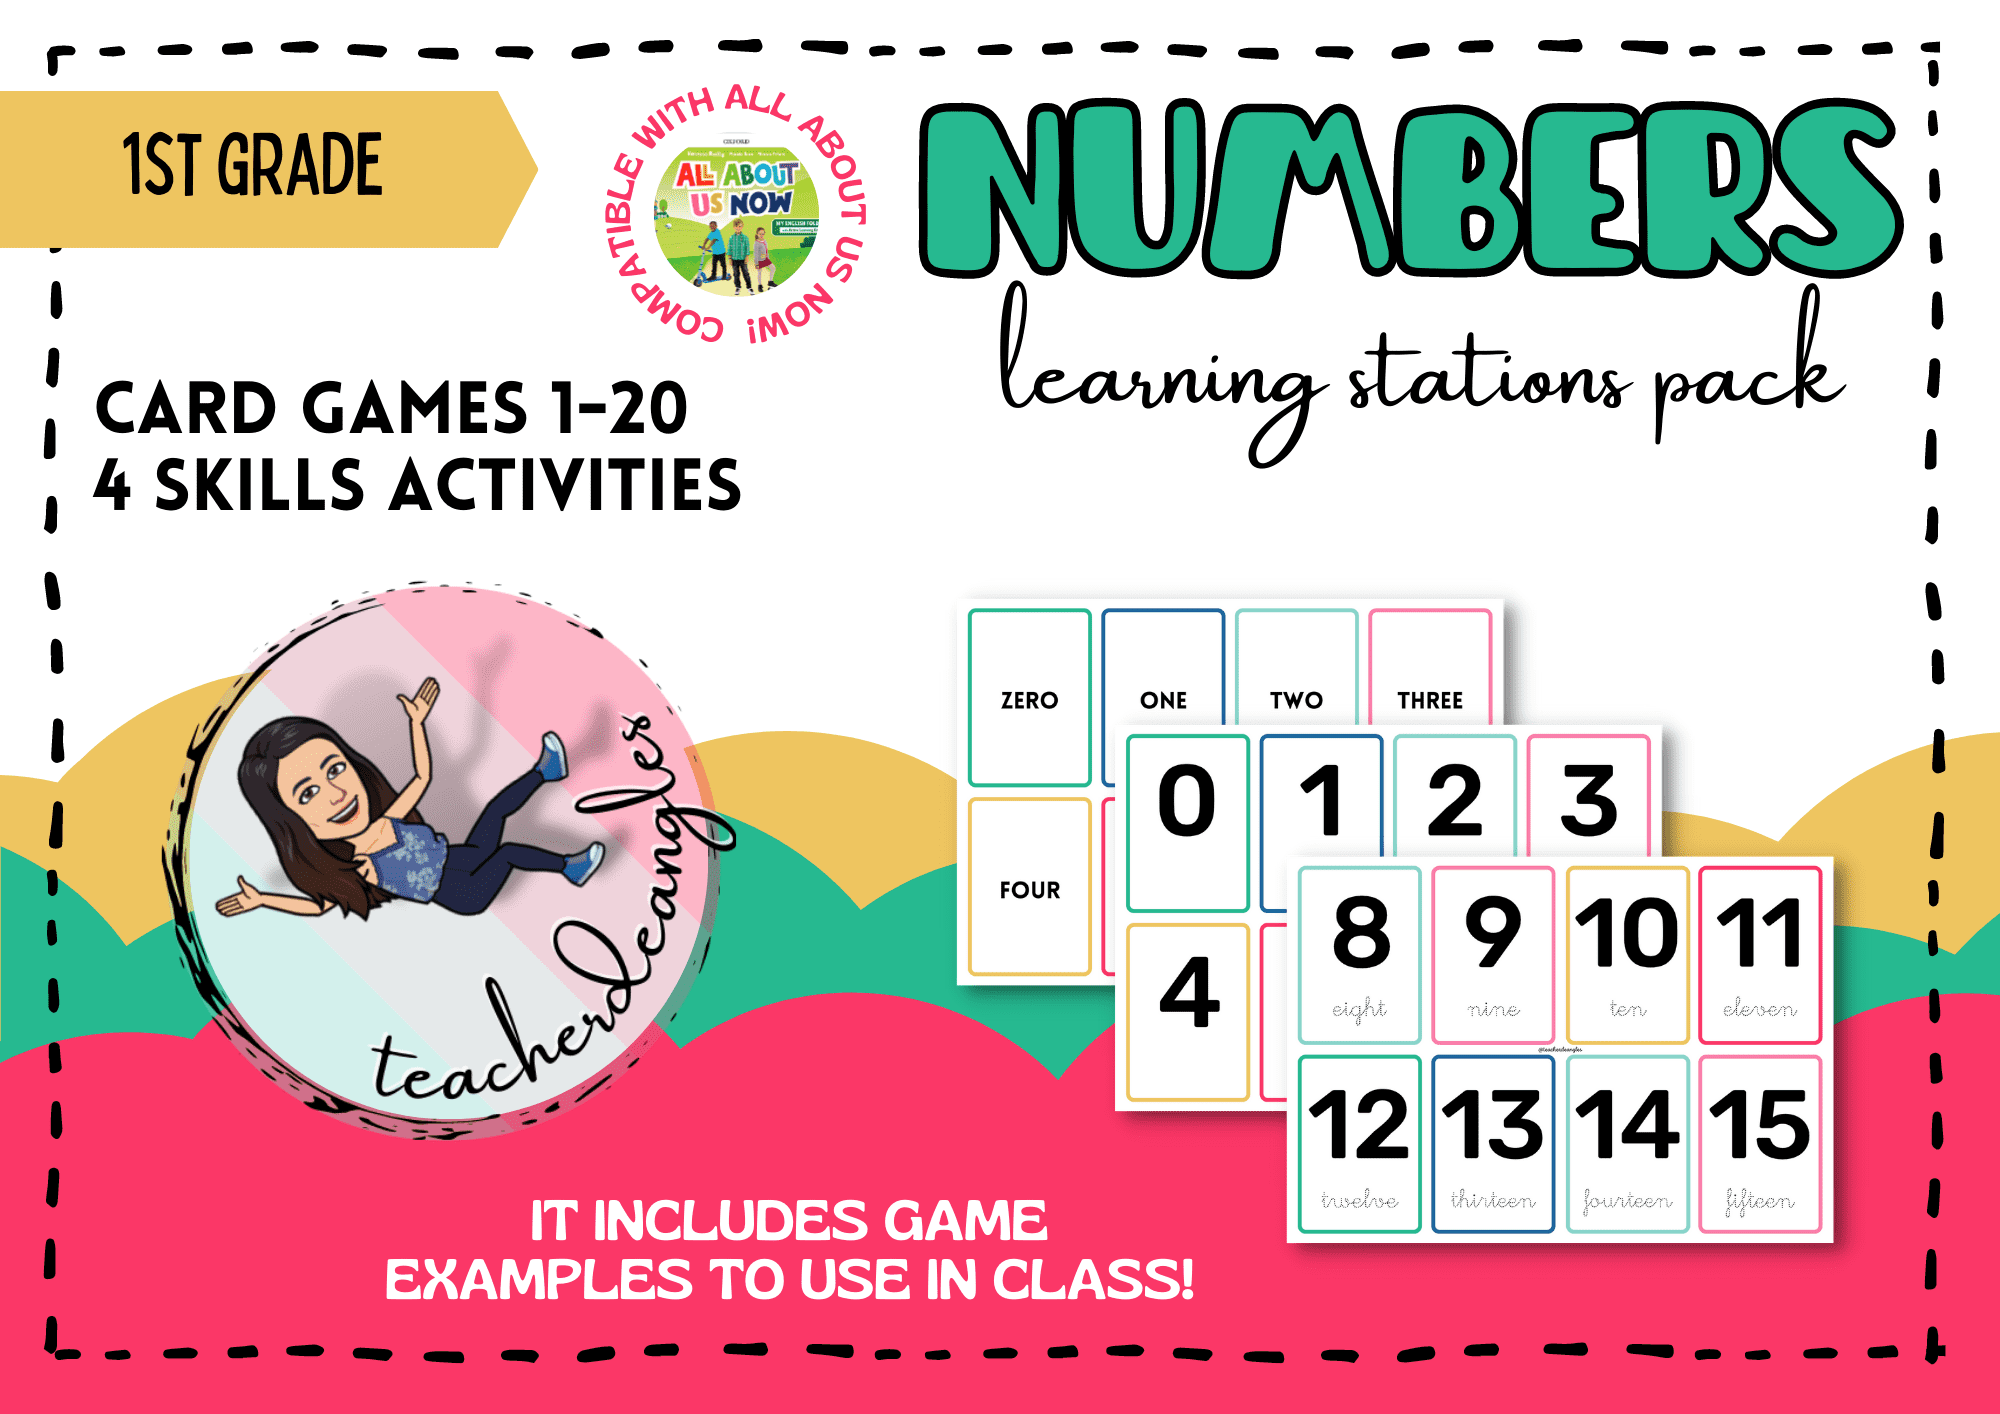 NUMBERS 1-20 LEARNING STATIONS PACK: CARD GAMES